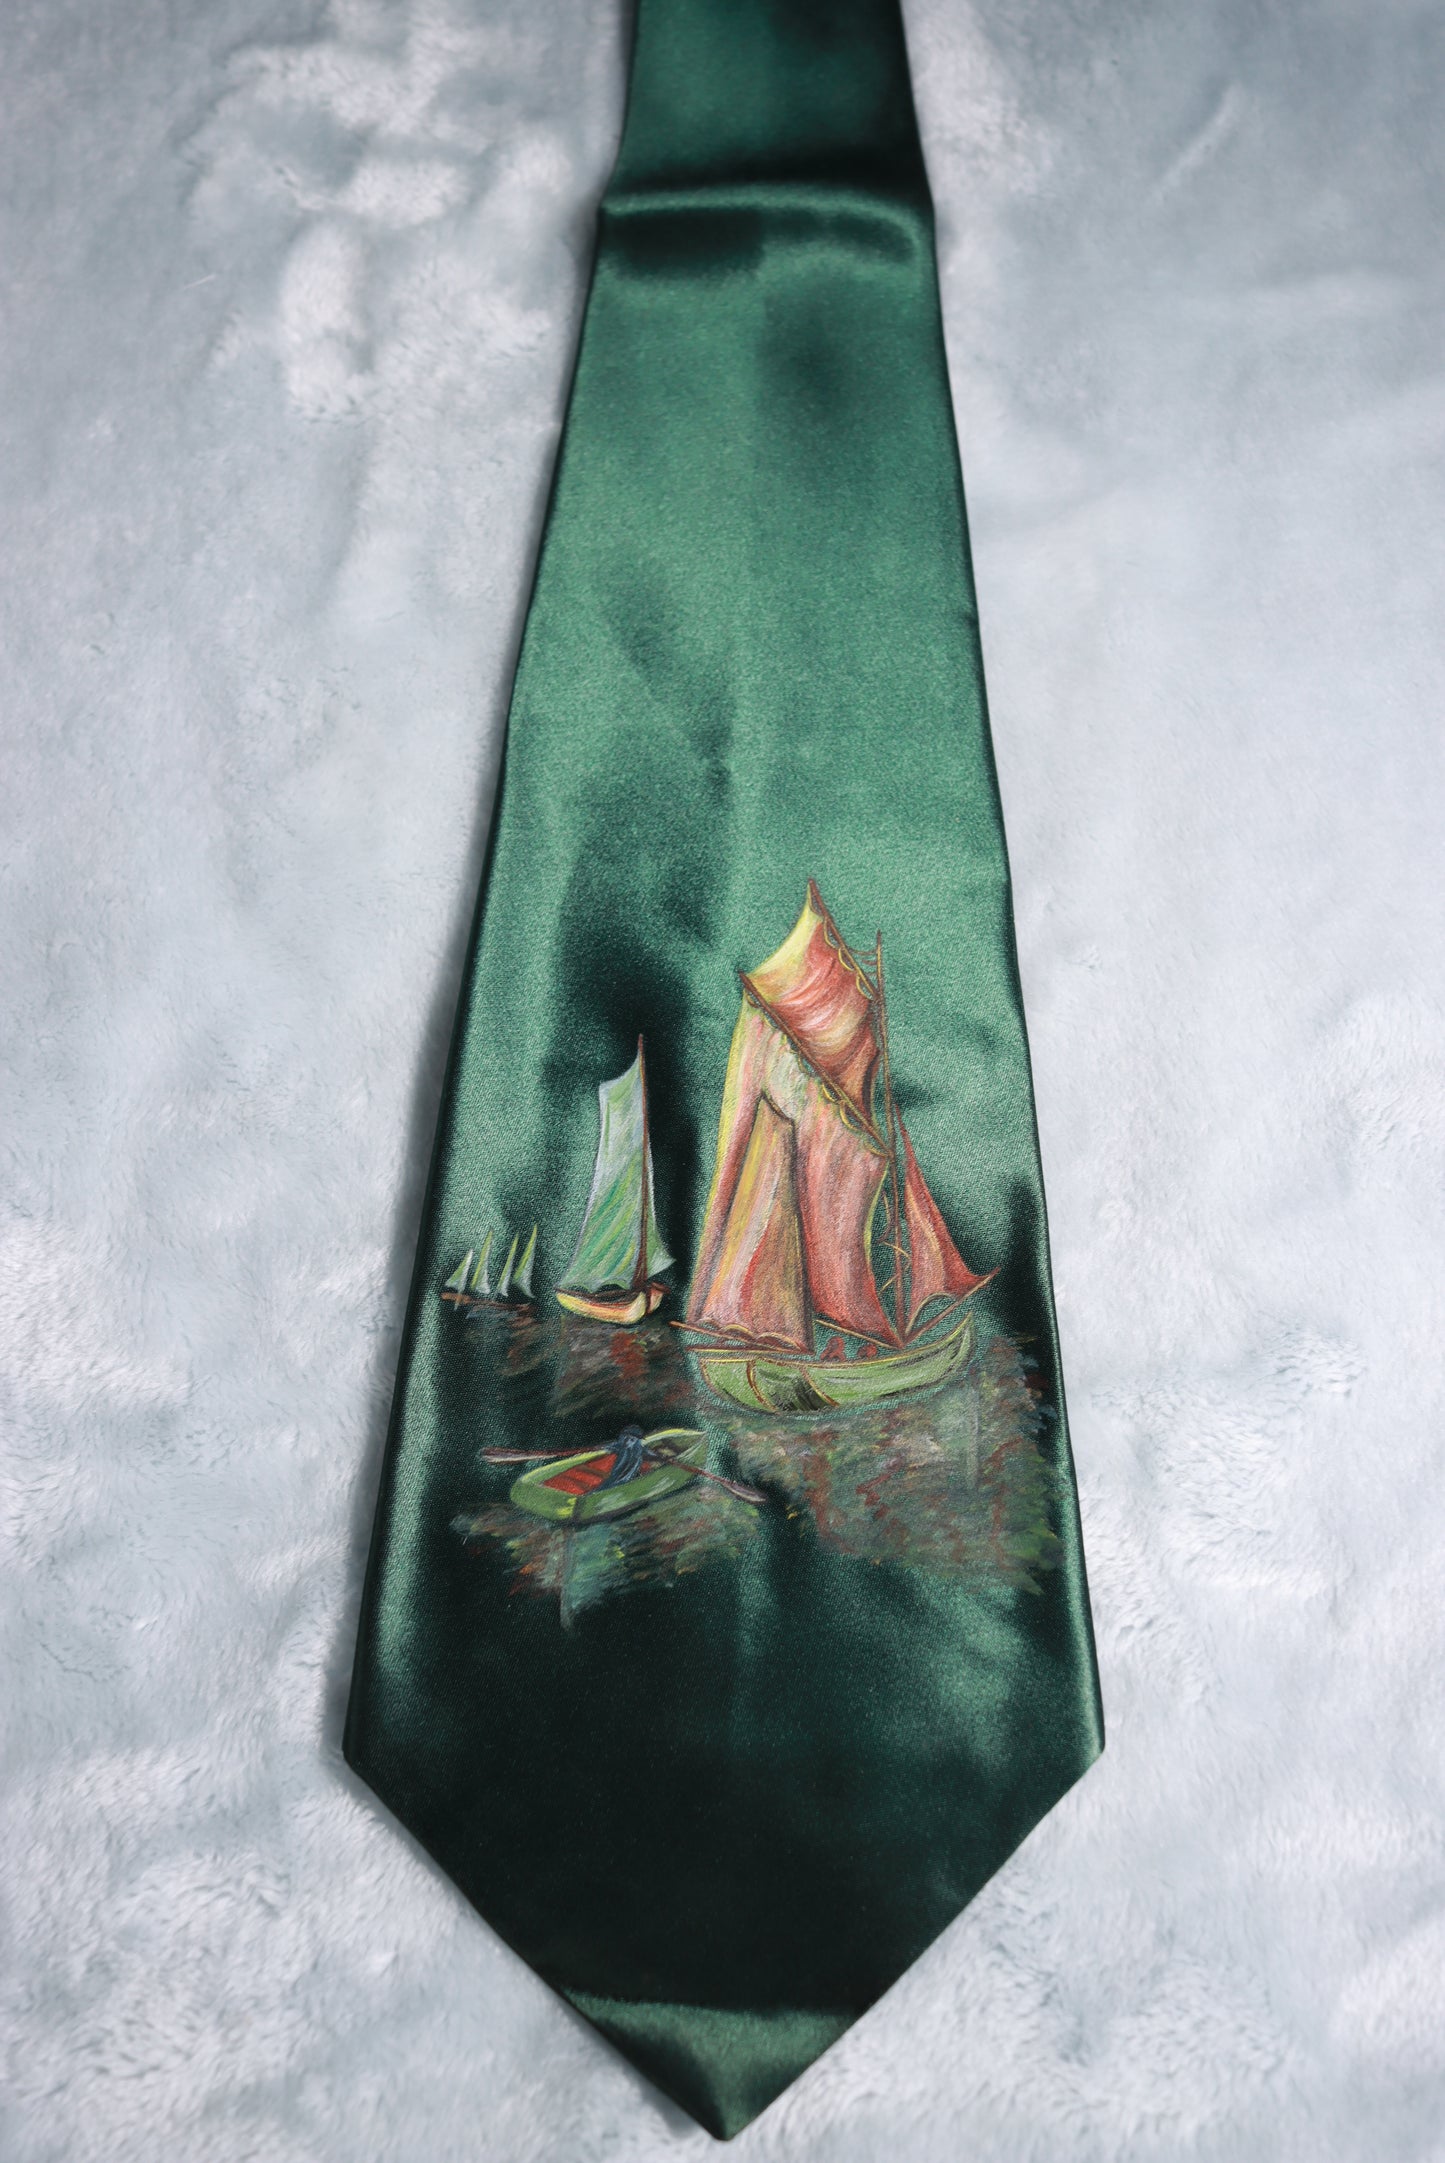 Vintage Green Satin Hand Painted Boats Swing Tie 1940s/50s